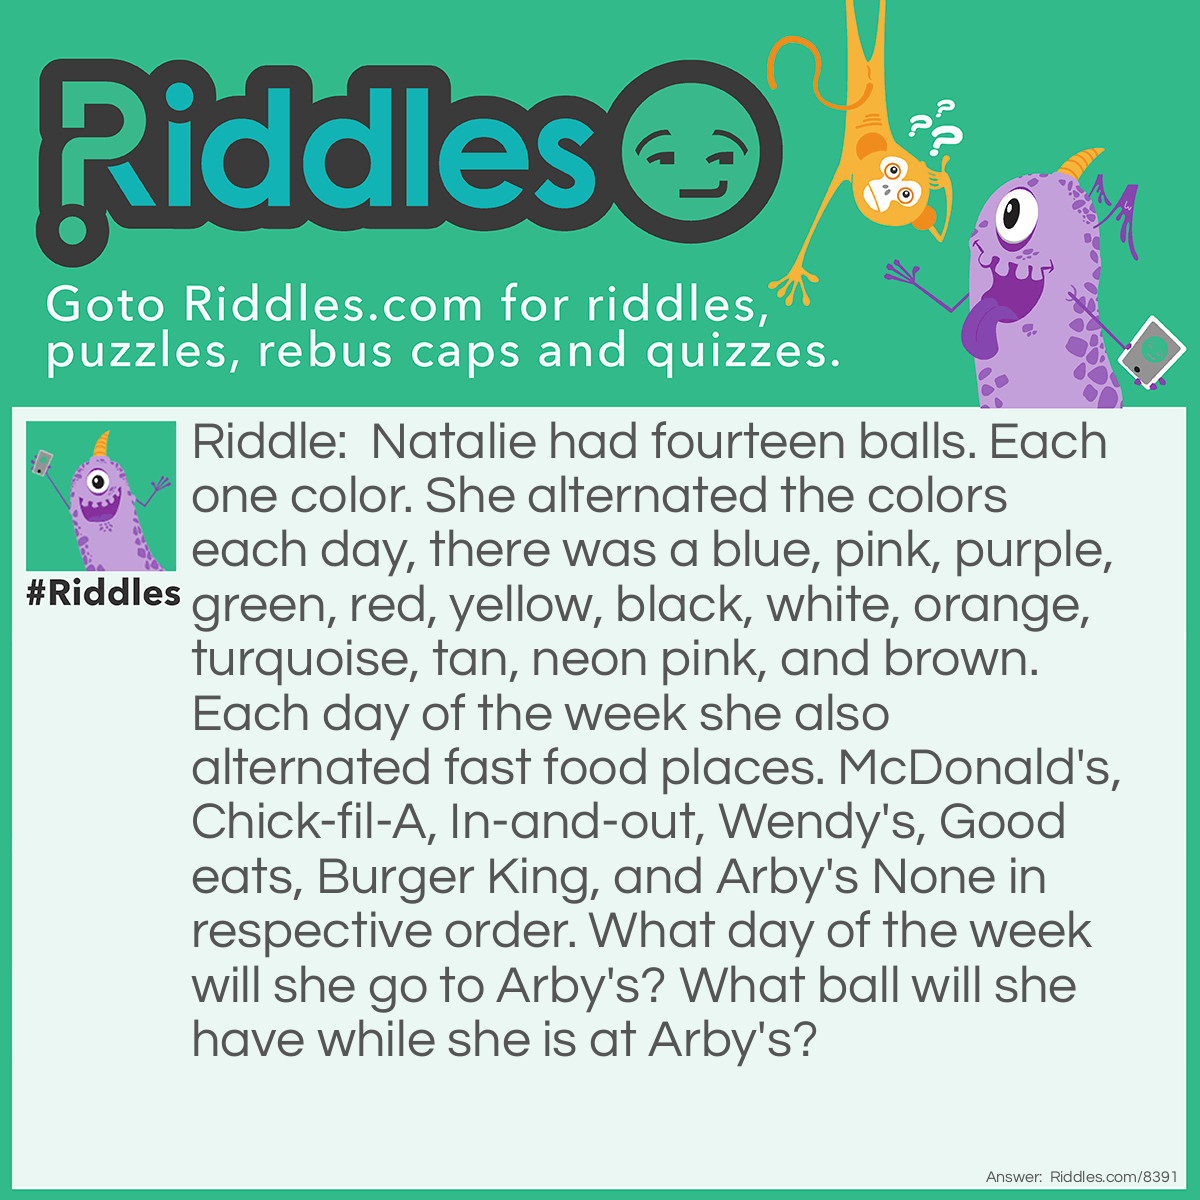 Riddle: Natalie had fourteen balls. Each one color. She alternated the colors each day, there were blue, pink, purple, green, red, yellow, black, white, orange, turquoise, tan, neon pink, and brown. Each day of the week she also alternated fast food places. McDonald's, Chick-fil-A, In-and-out, Wendy's, Good Eats, Burger King, and Arby's None in respective order. <a href="/6185">What day of the week</a> will she go to Arby's? What ball will she have while she is at Arby's? Answer: She will go to Arby's on Monday, for that is the first day of the week and A is the first letter of the alphabet. So on Tuesday she would go to Burger King. On Wednesday she would go to Chick-fil-A. And so on. She would have a Red Ball On Monday, because red is the first color of the rainbow. So on Tuesday she would have a Orange ball. And so on.